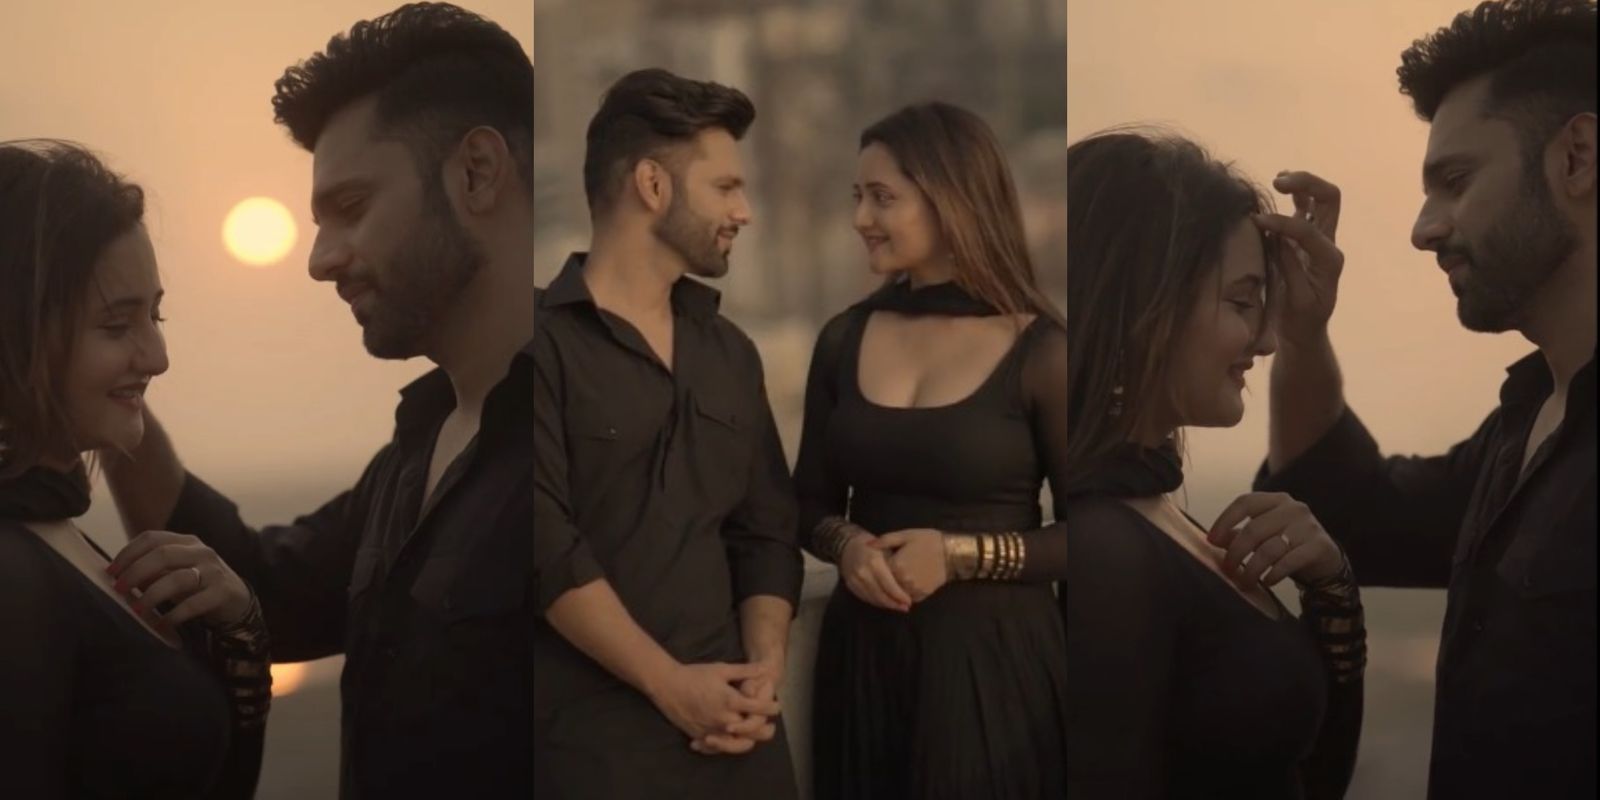 Rahul Vaidya And Rashami Desai Share The Full Version Of Kinna Sona After Teasing Fans With A Promo; Watch